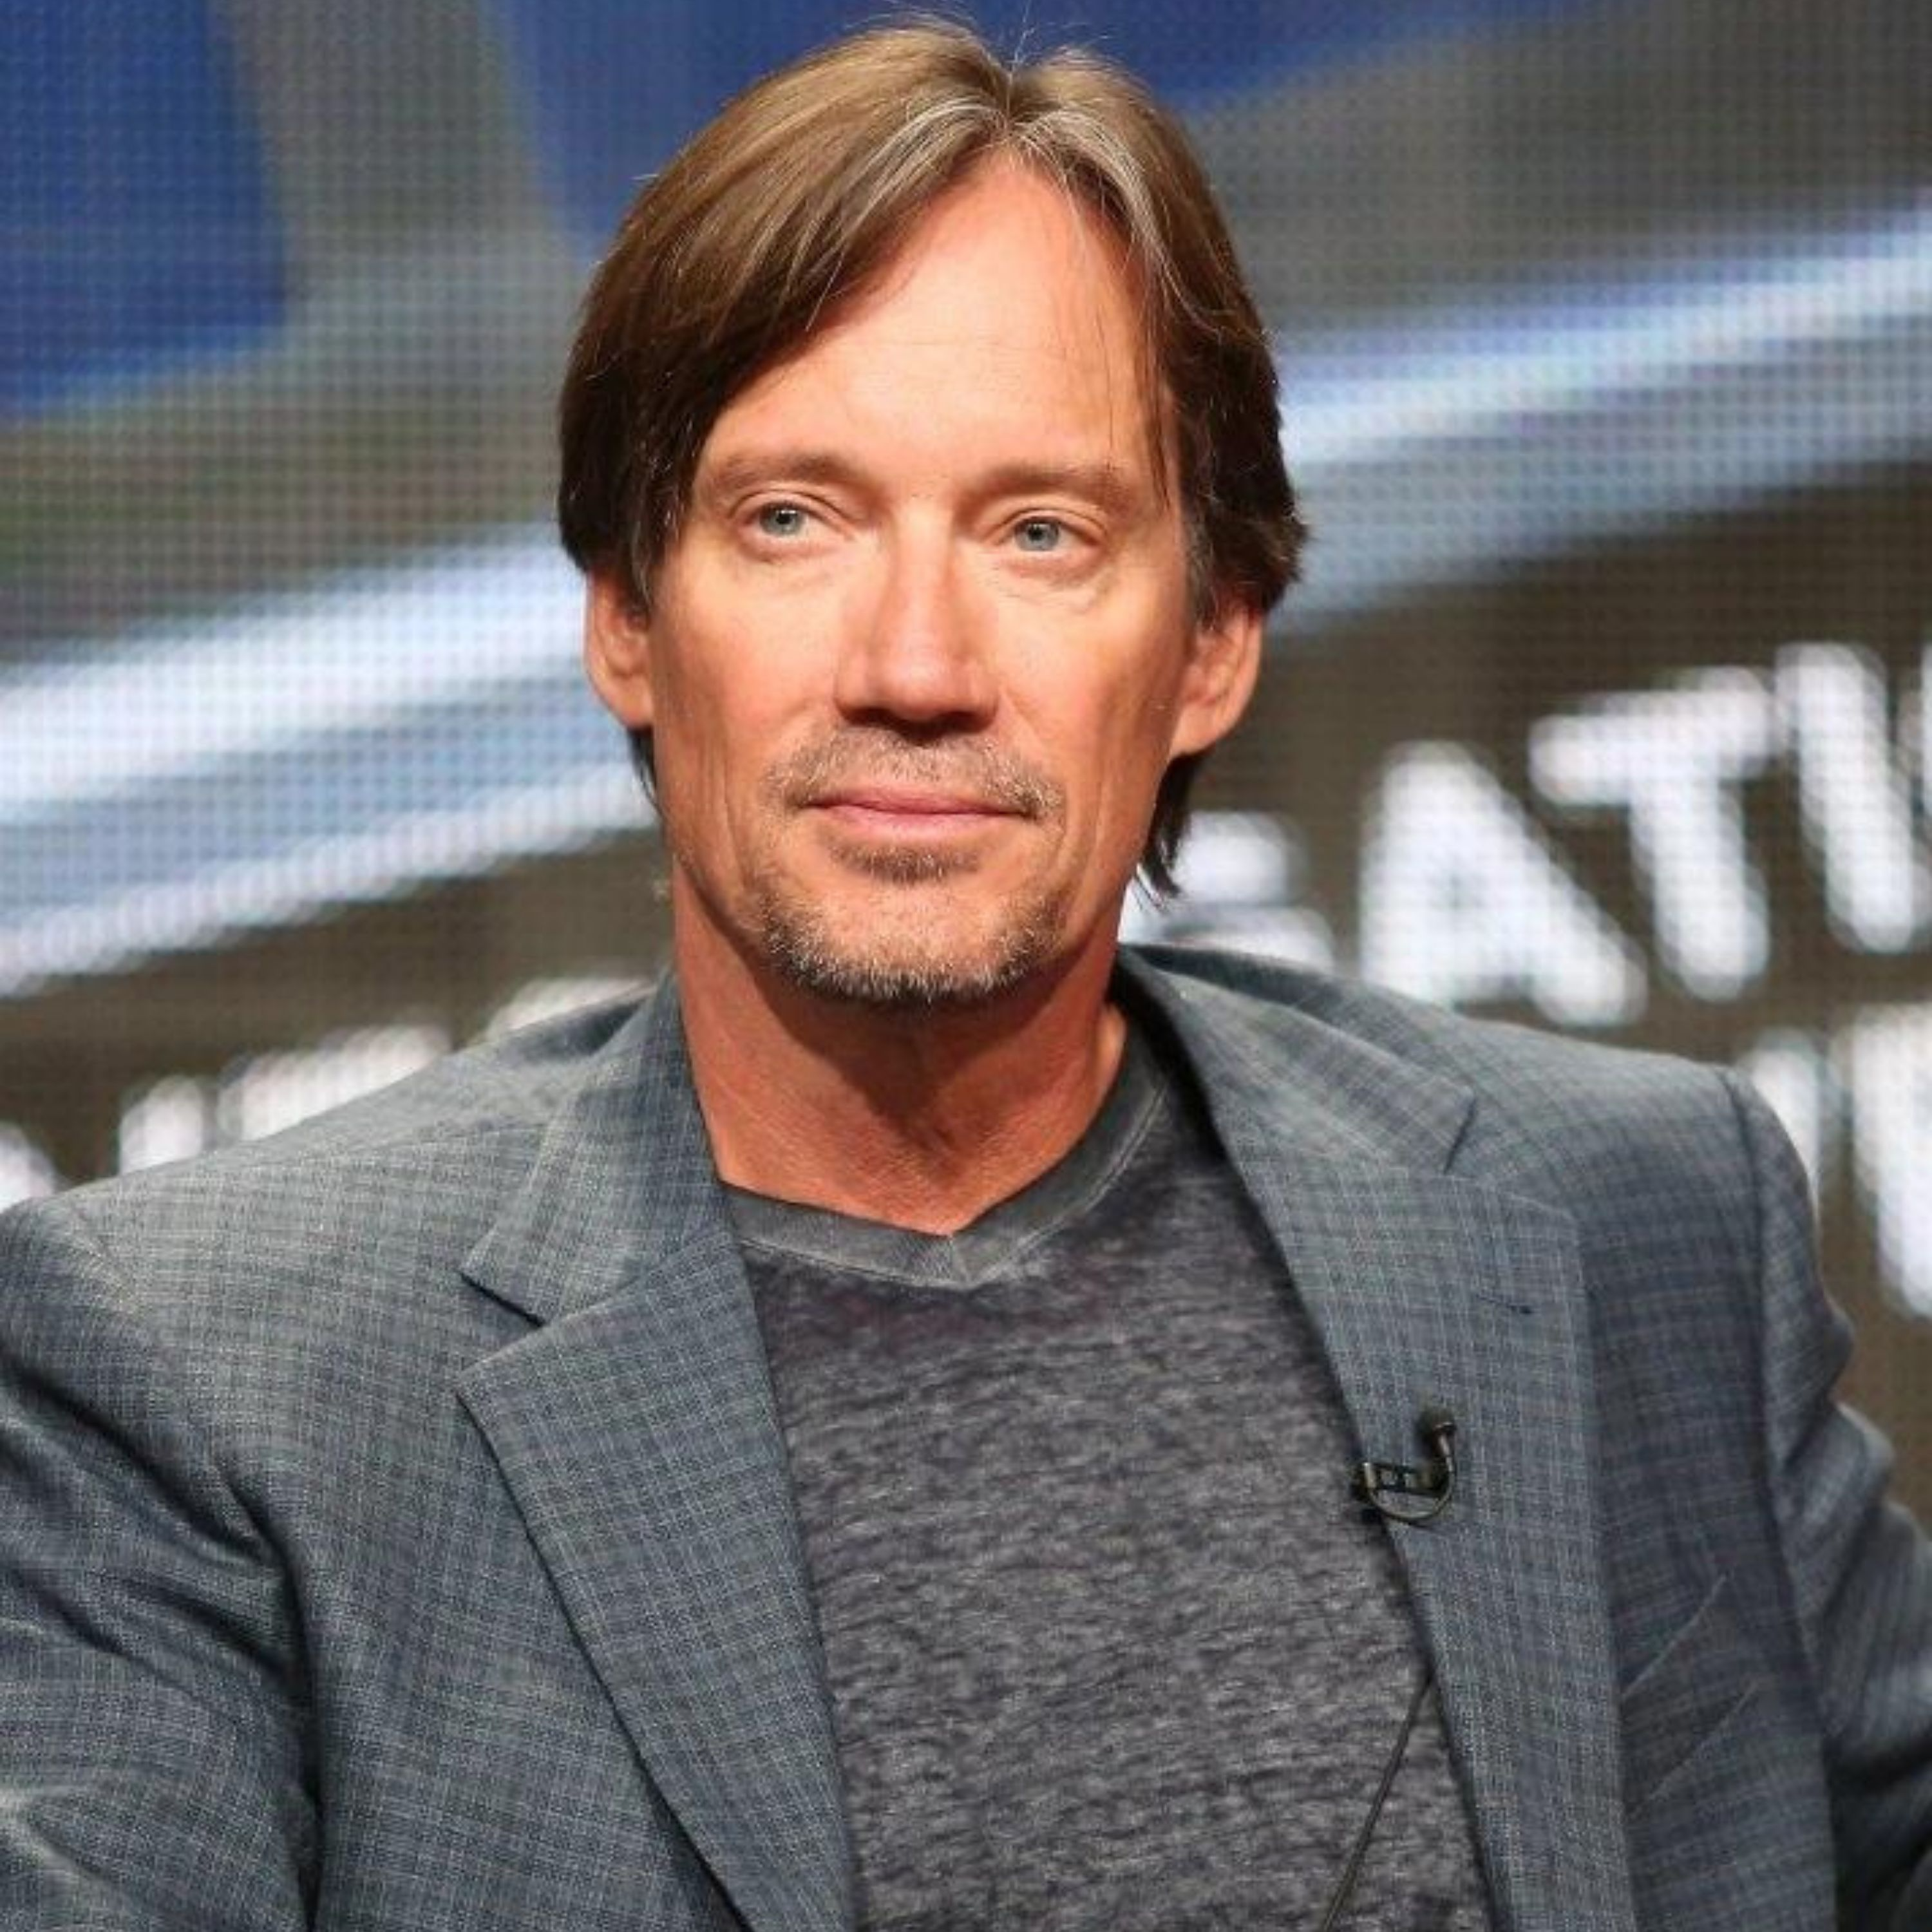 EP573: TL Nuggets 161 Kevin Sorbo - How To Have The Courage Of Your Convictions